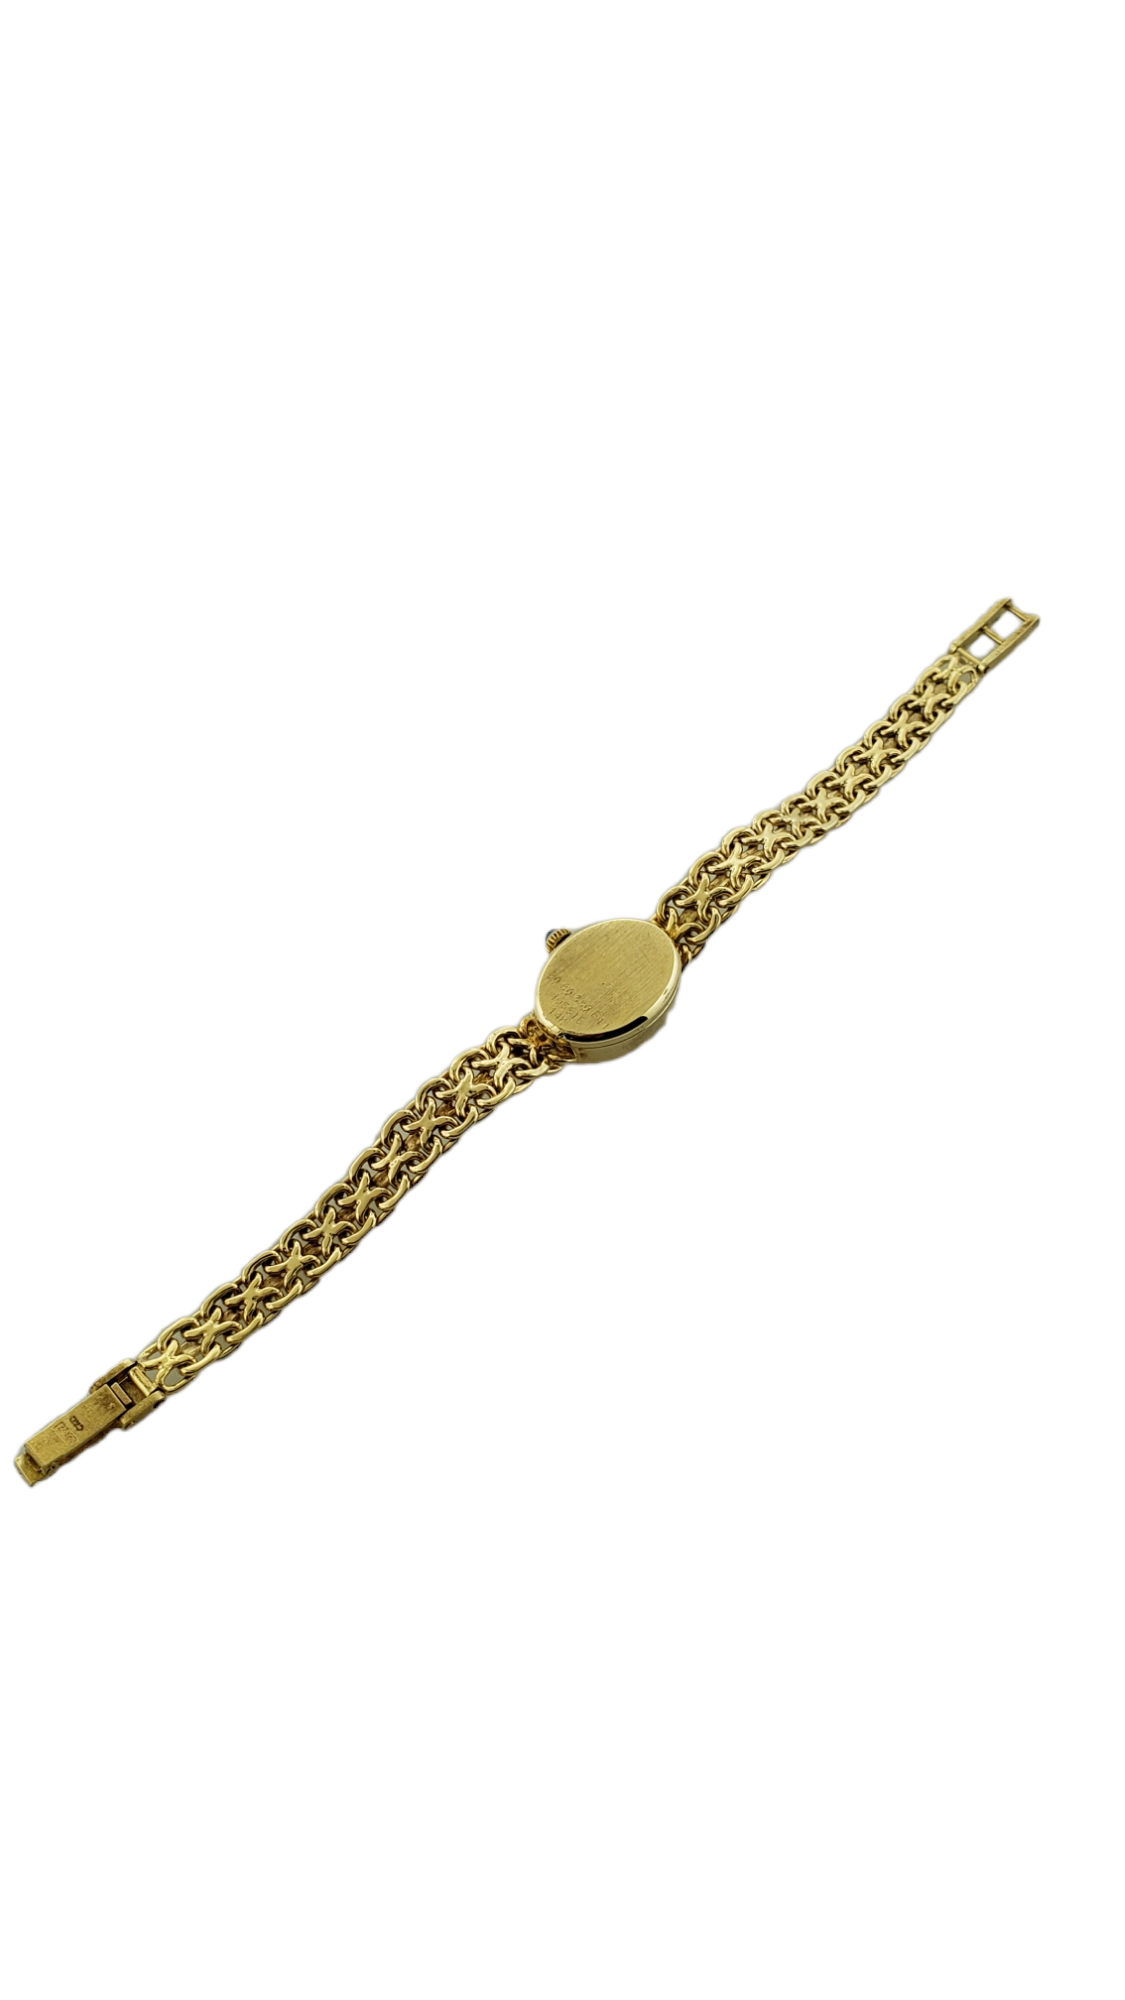 Vintage Concord 14K Yellow Gold Ladies Watch Preowned